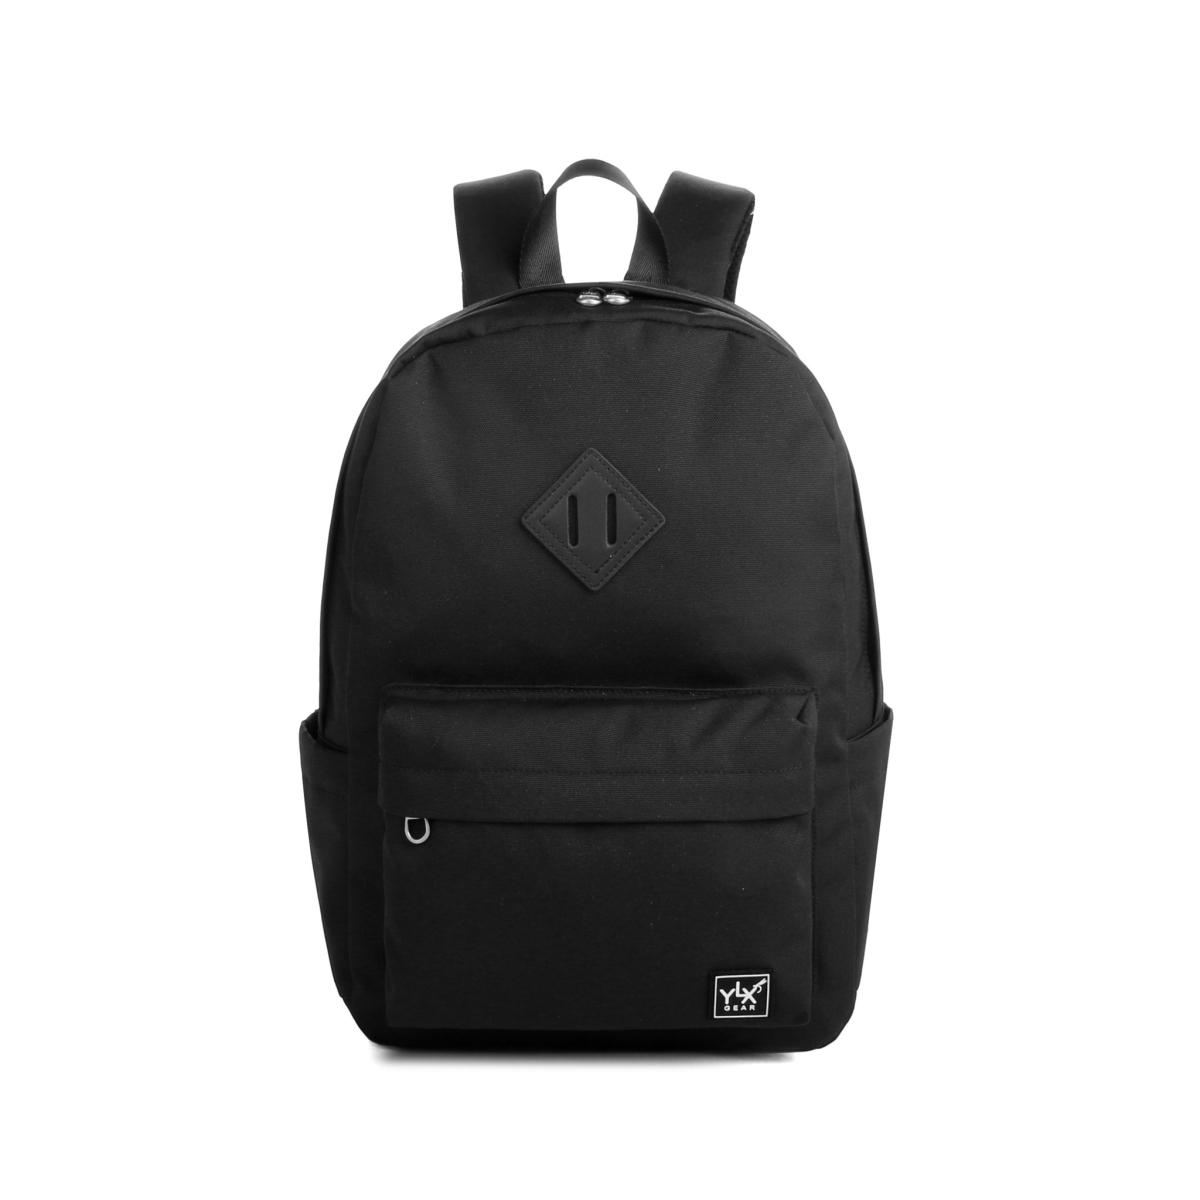 YLX Finch Backpack